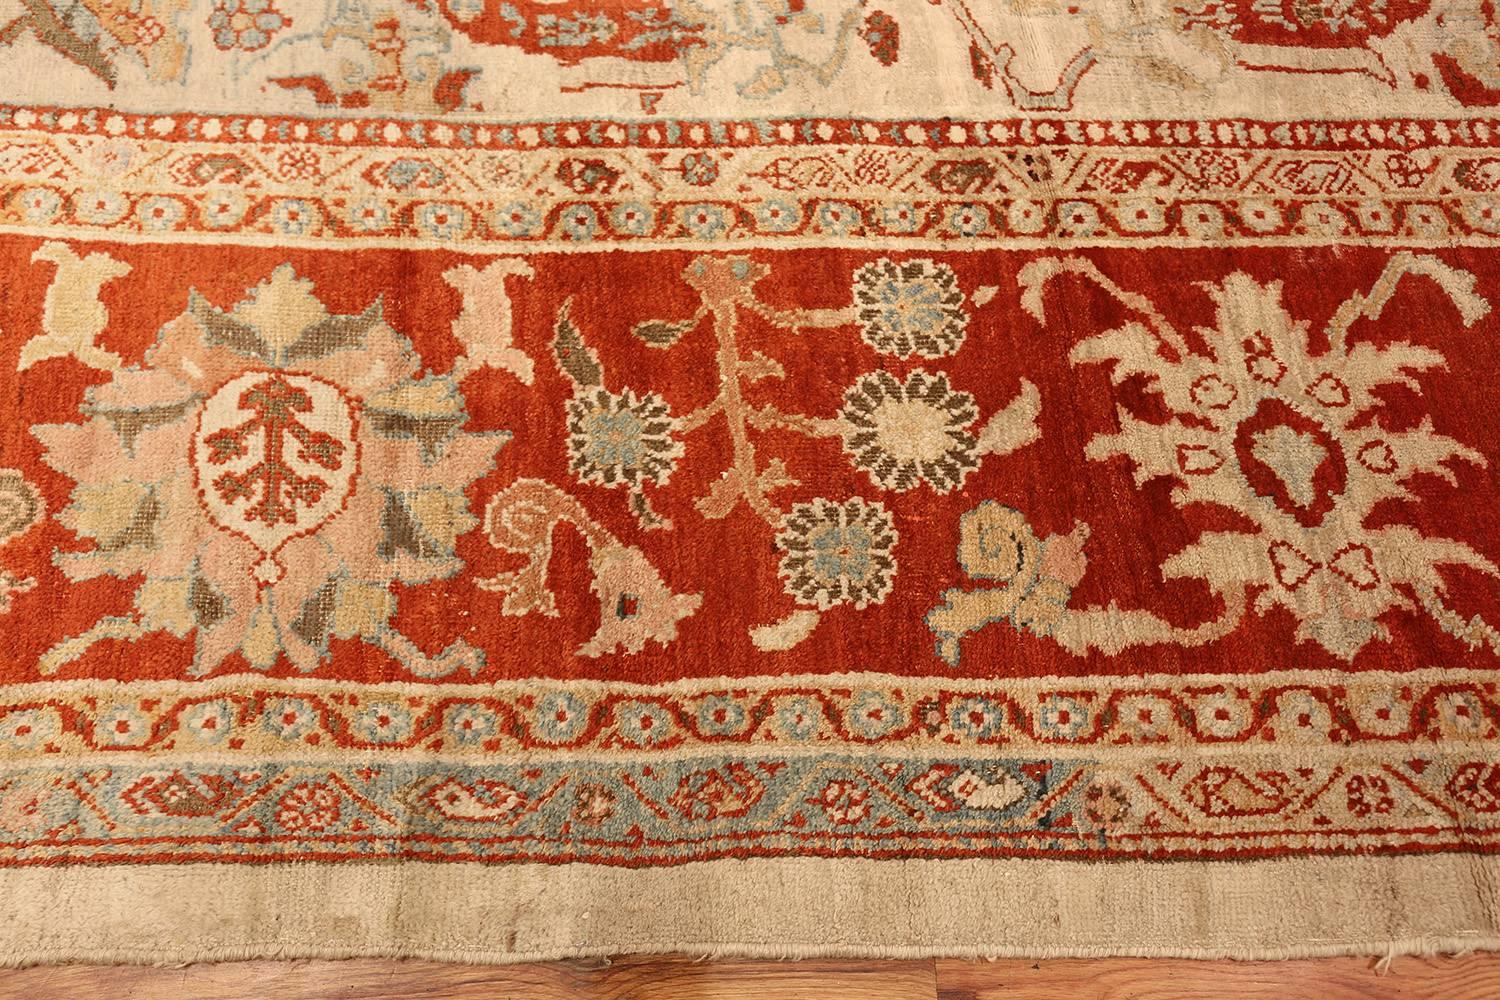 Antique Ziegler Sultanabad Persian Rug. 12 ft 4 in x 20 ft  For Sale 3